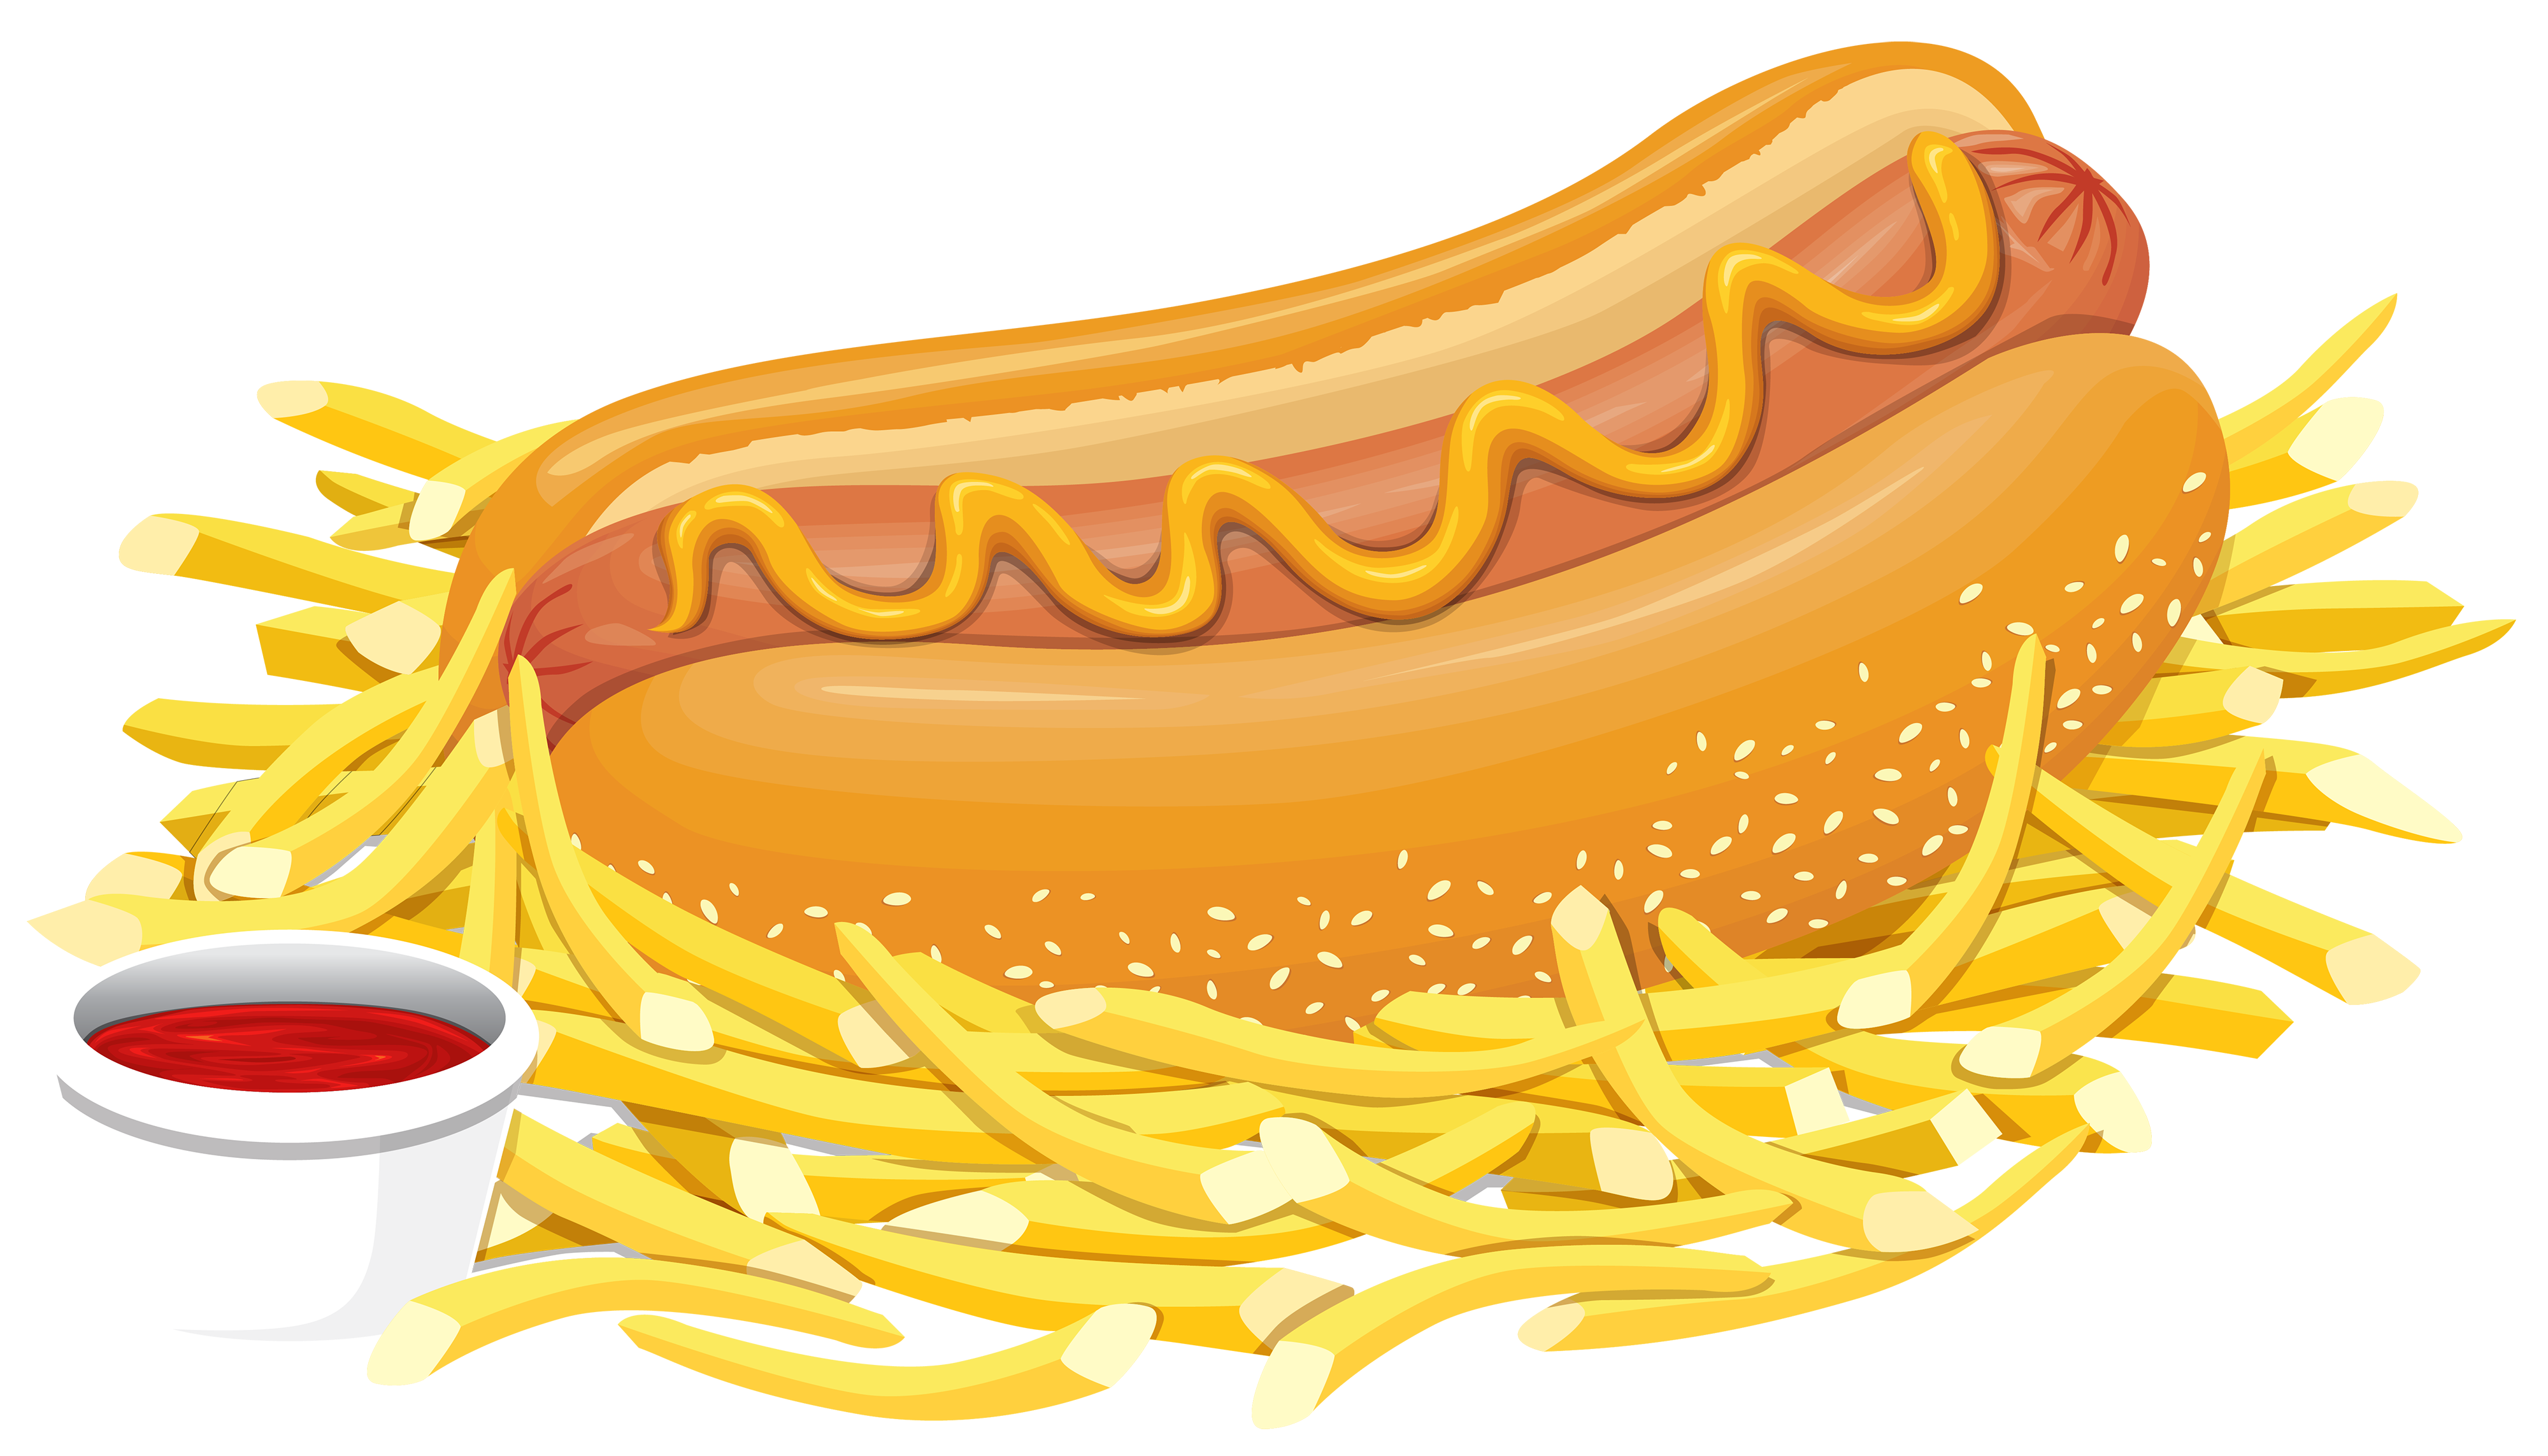 Fries clipart large. Hot dog with ketchup